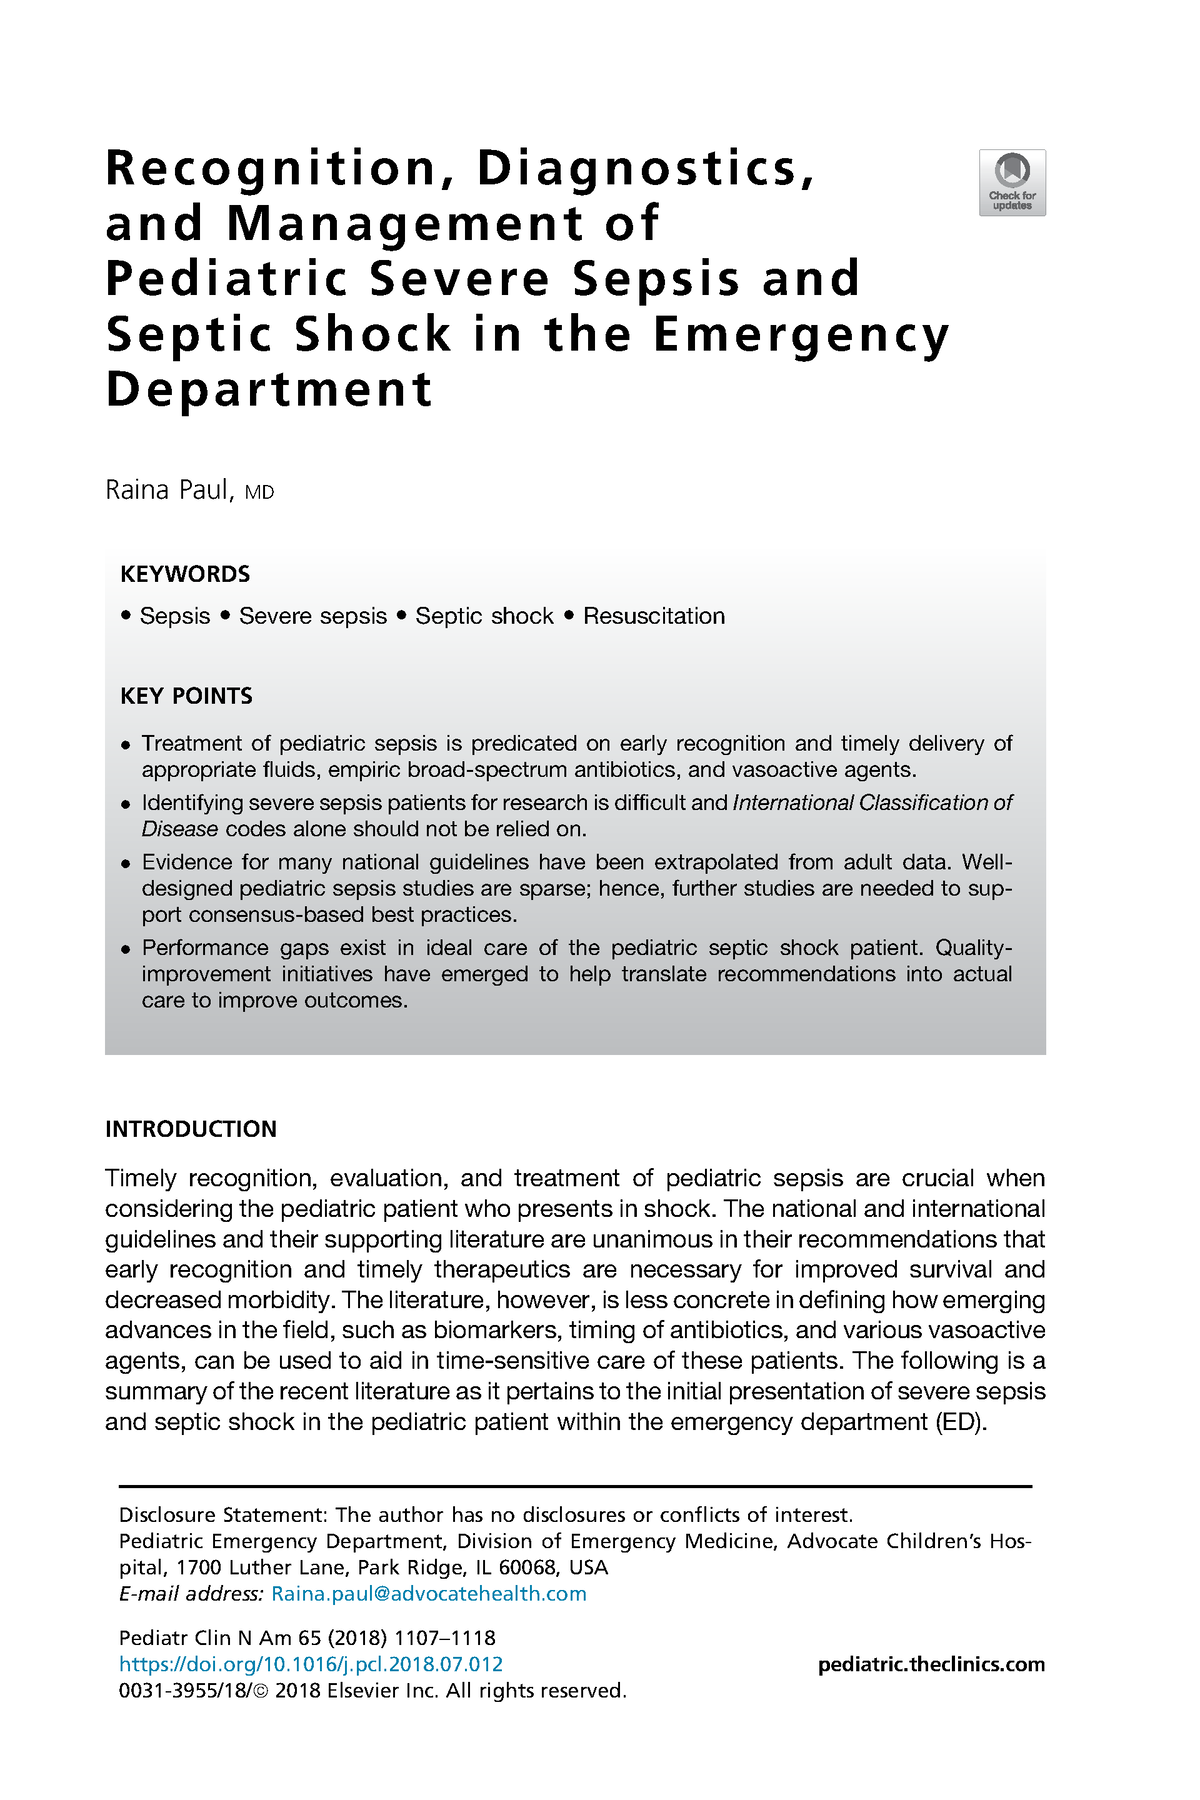 Recognition Diagnostics And Management Of Pediatric Severe Sepsis And Septic Shock In The